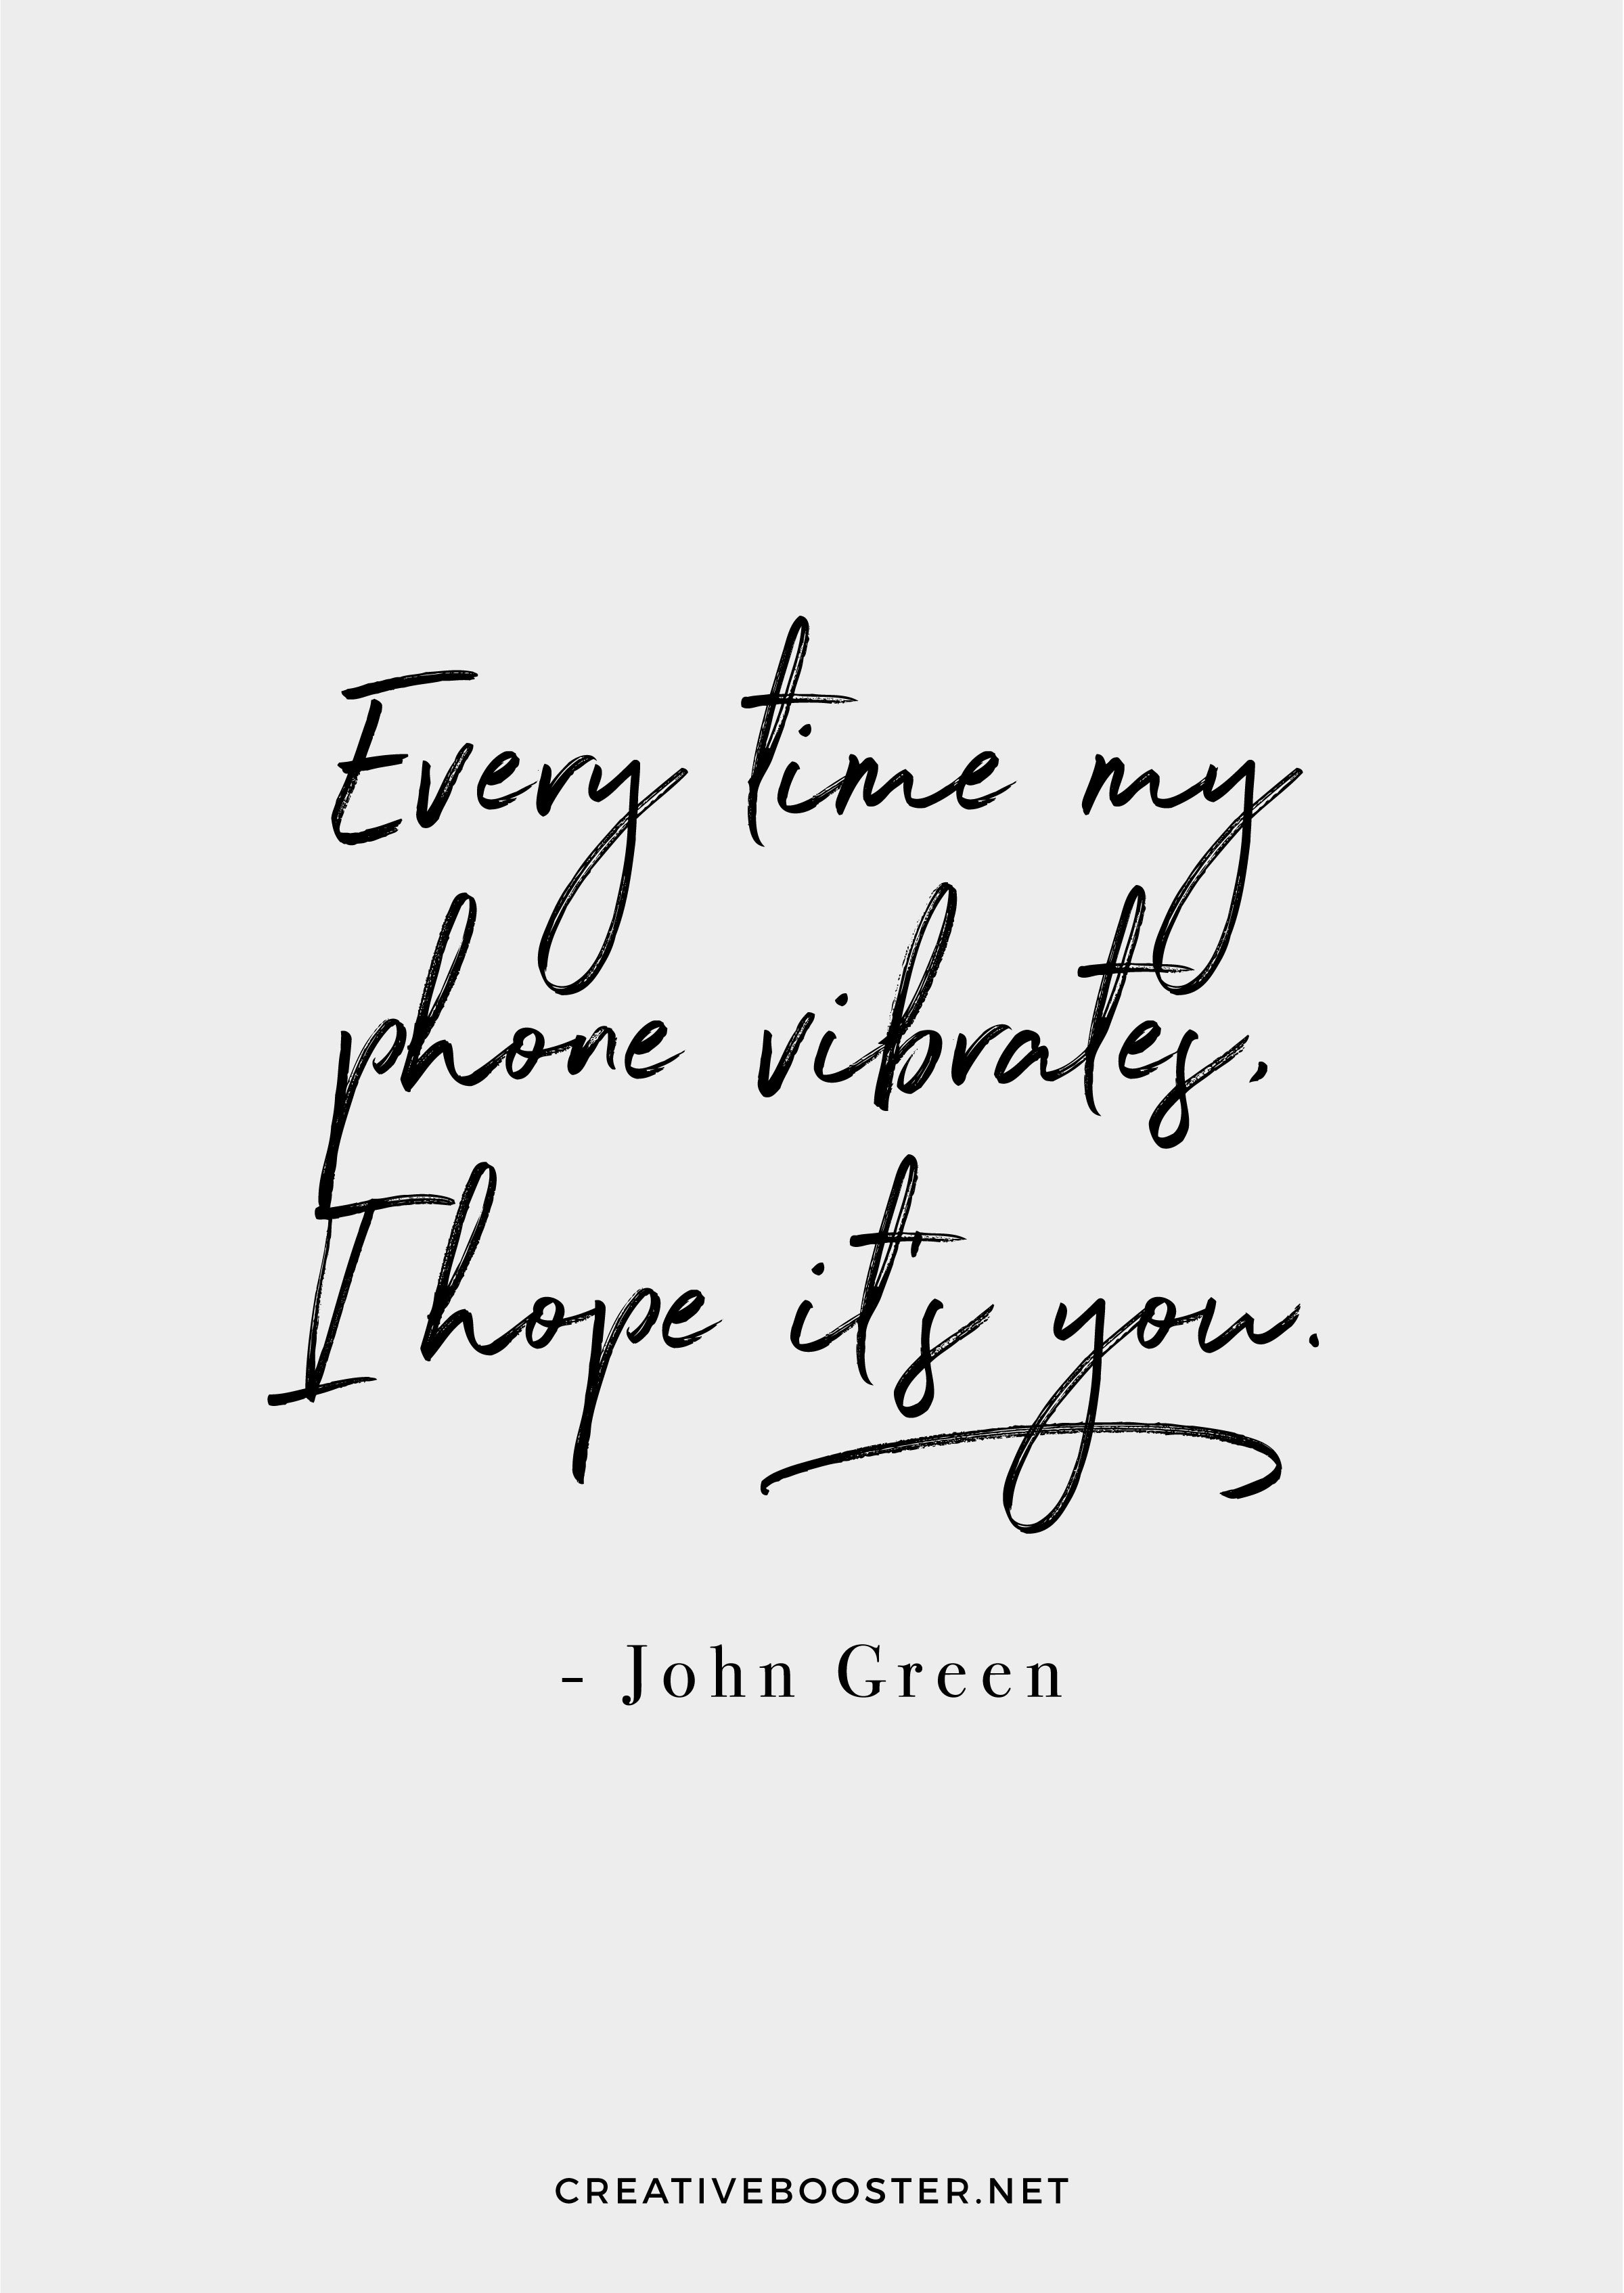 "Every time my phone vibrates, I hope it's you." — John Green